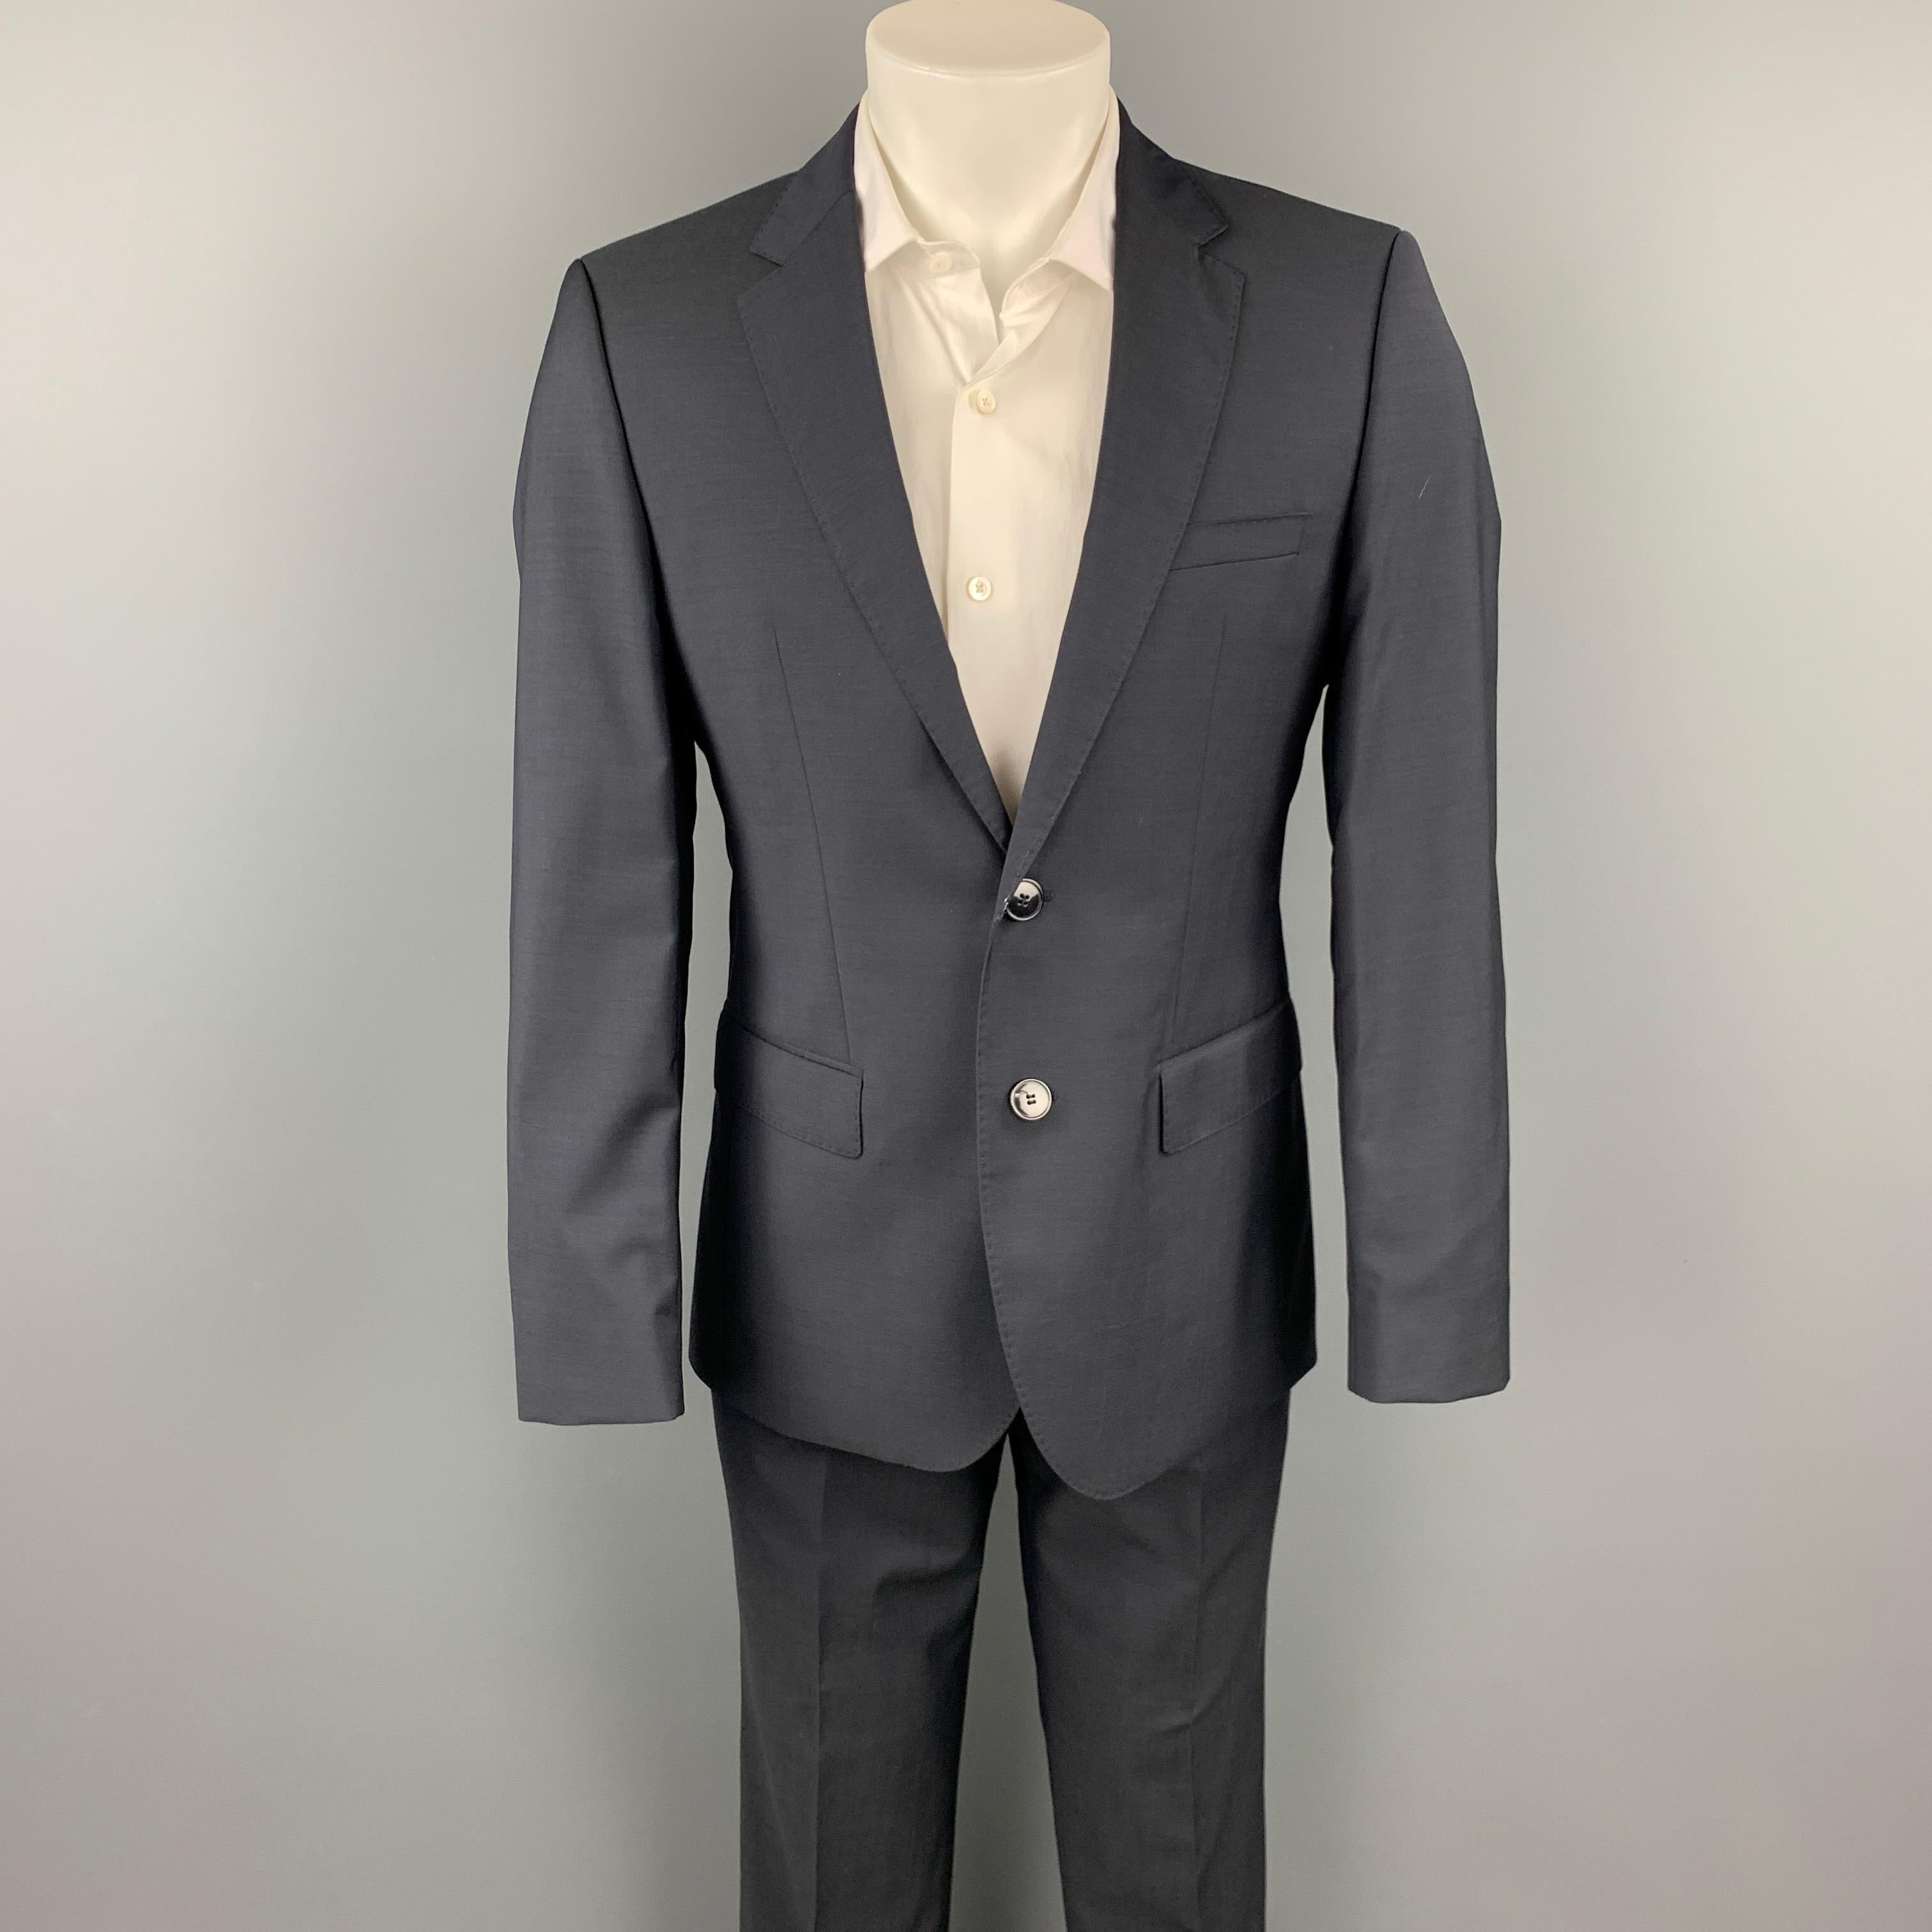 HUGO by HUGO BOSS suit comes in a dark blue virgin wool with a full liner and includes a single breasted, two button sport coat with a notch lapel and matching flat front trousers. Pants have been altered.

New With Tags.
Marked: 36 R
Original